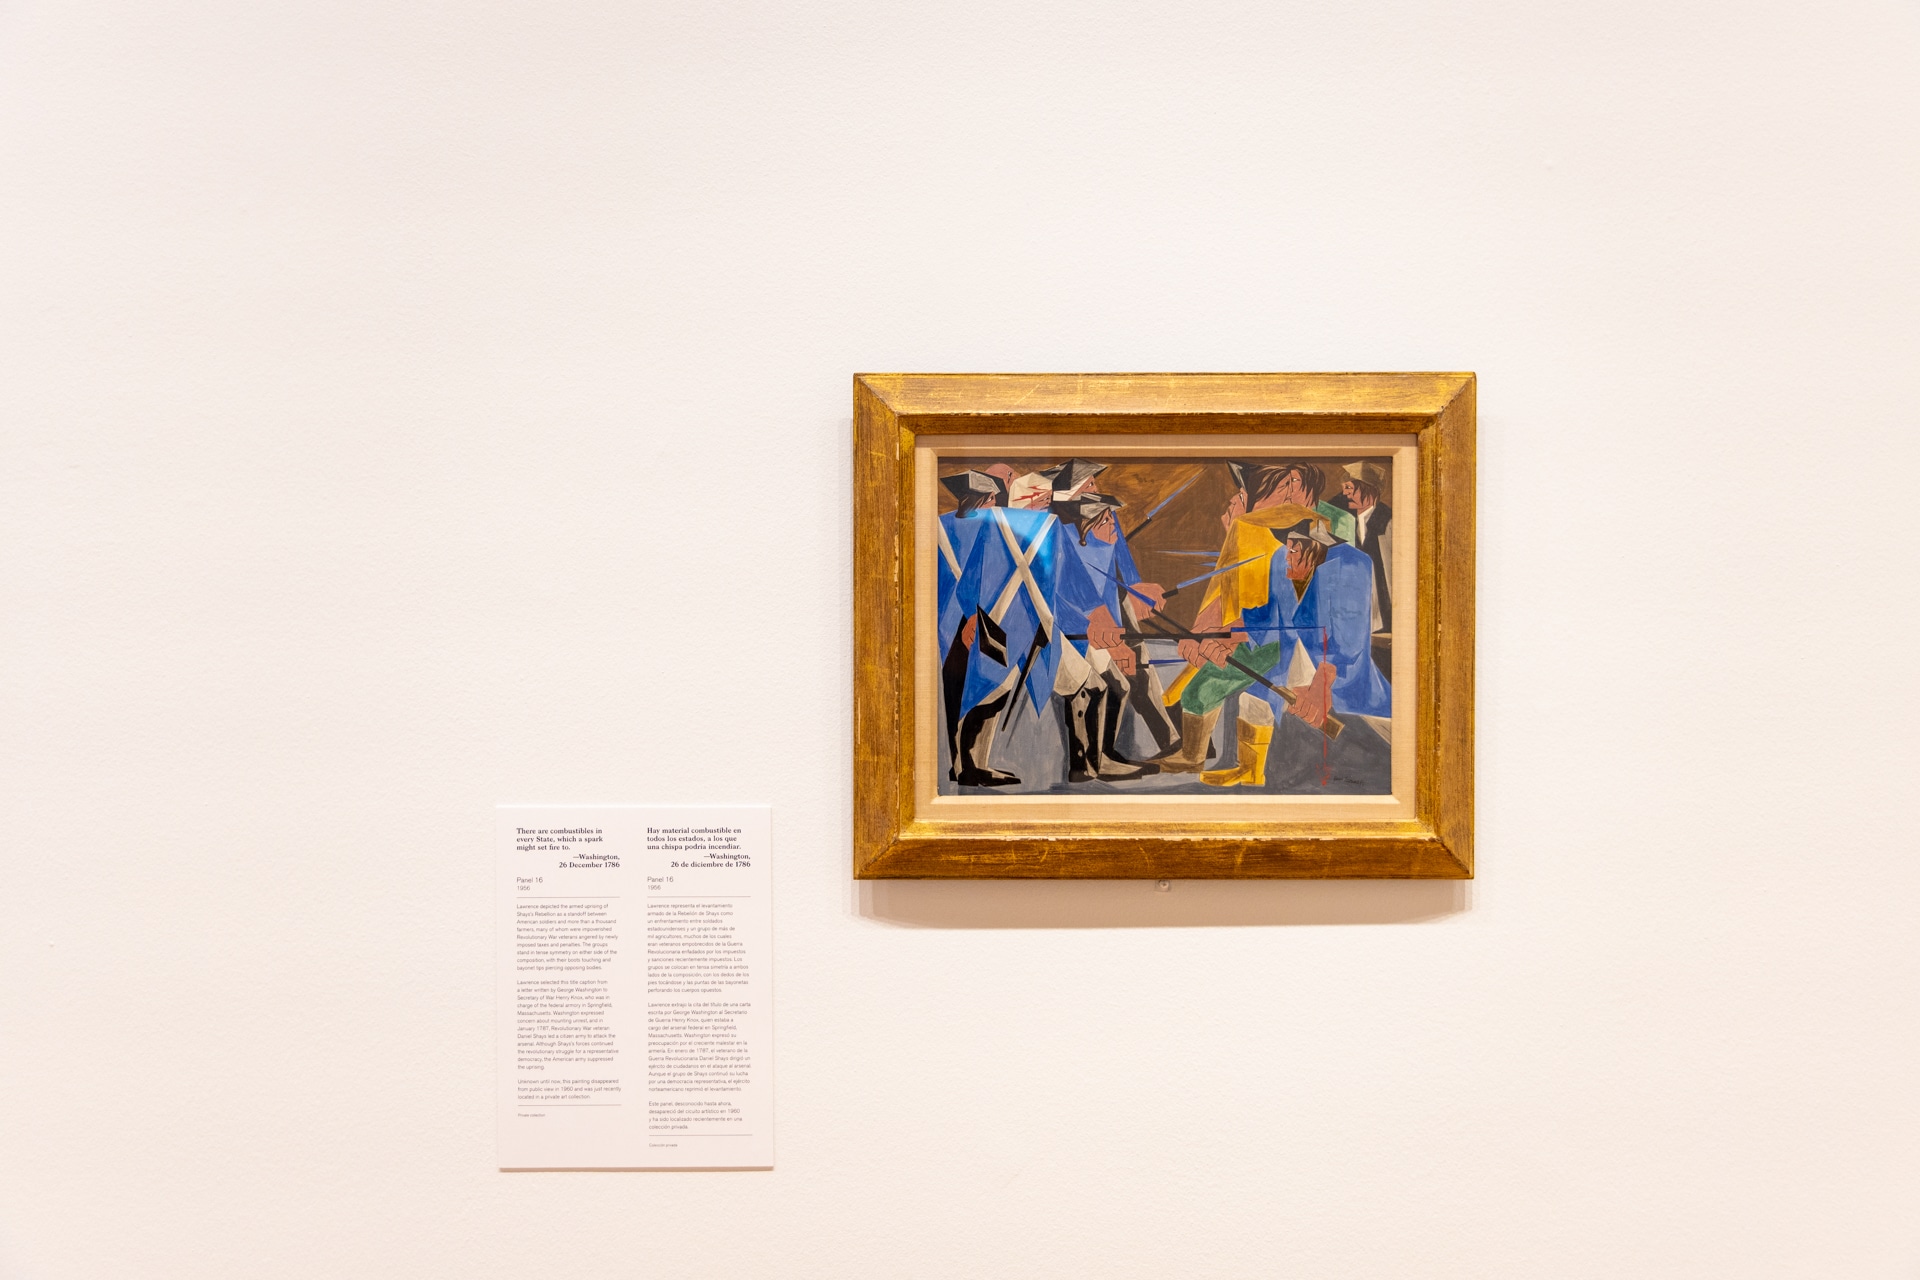 BMA Jacob Lawrence 10 "Jacob Lawrence: The American Struggle" retells history at the Birmingham Museum of Art